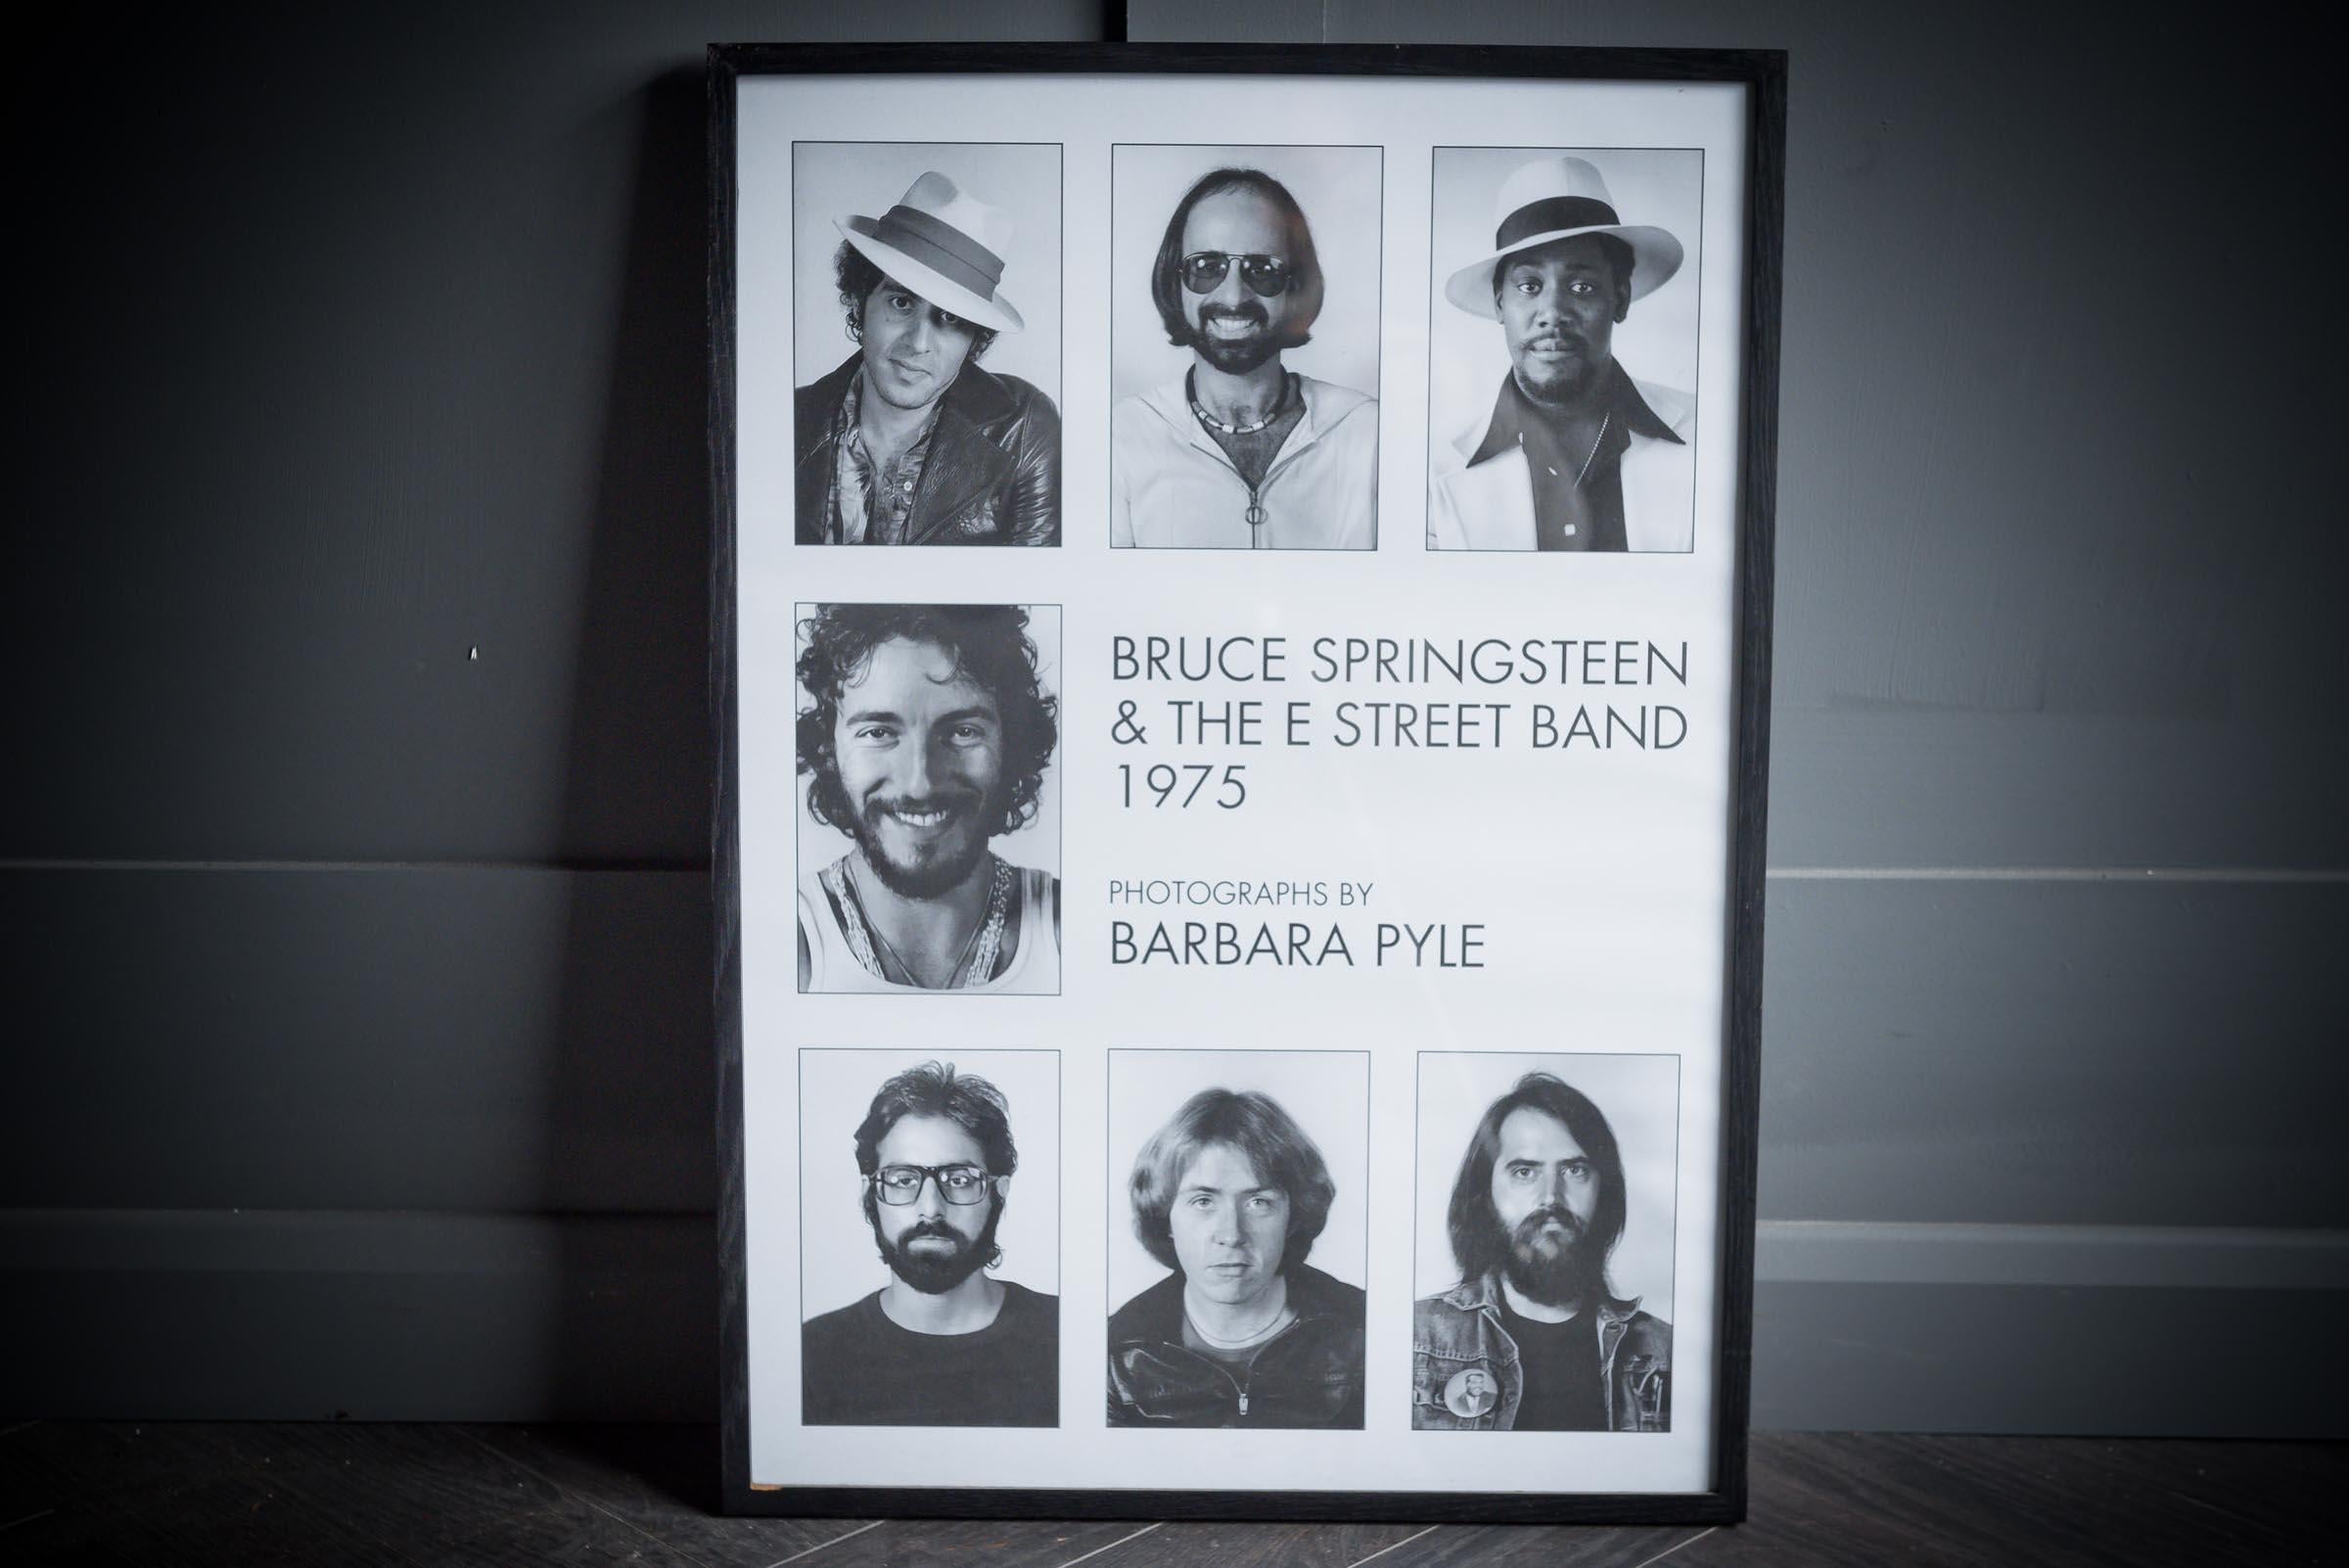 Framed print of Bruce Springsteen and the E Street Band photographed in 1975 by Barbara Pyle.